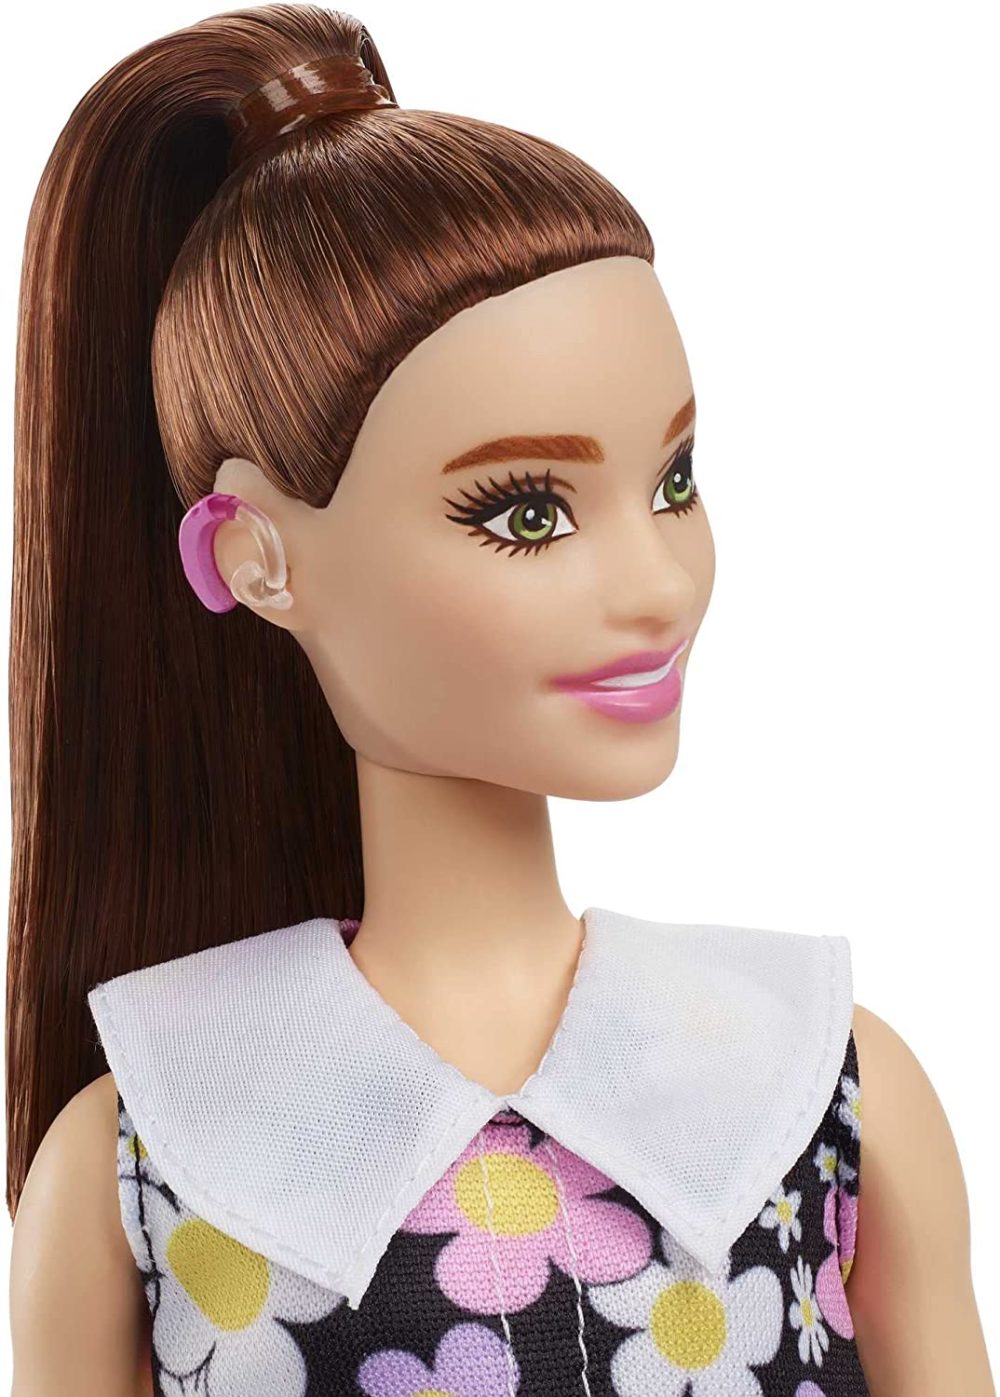 Barbie ‘Fashionista’ Line Includes A Doll With BTE Hearing Aids